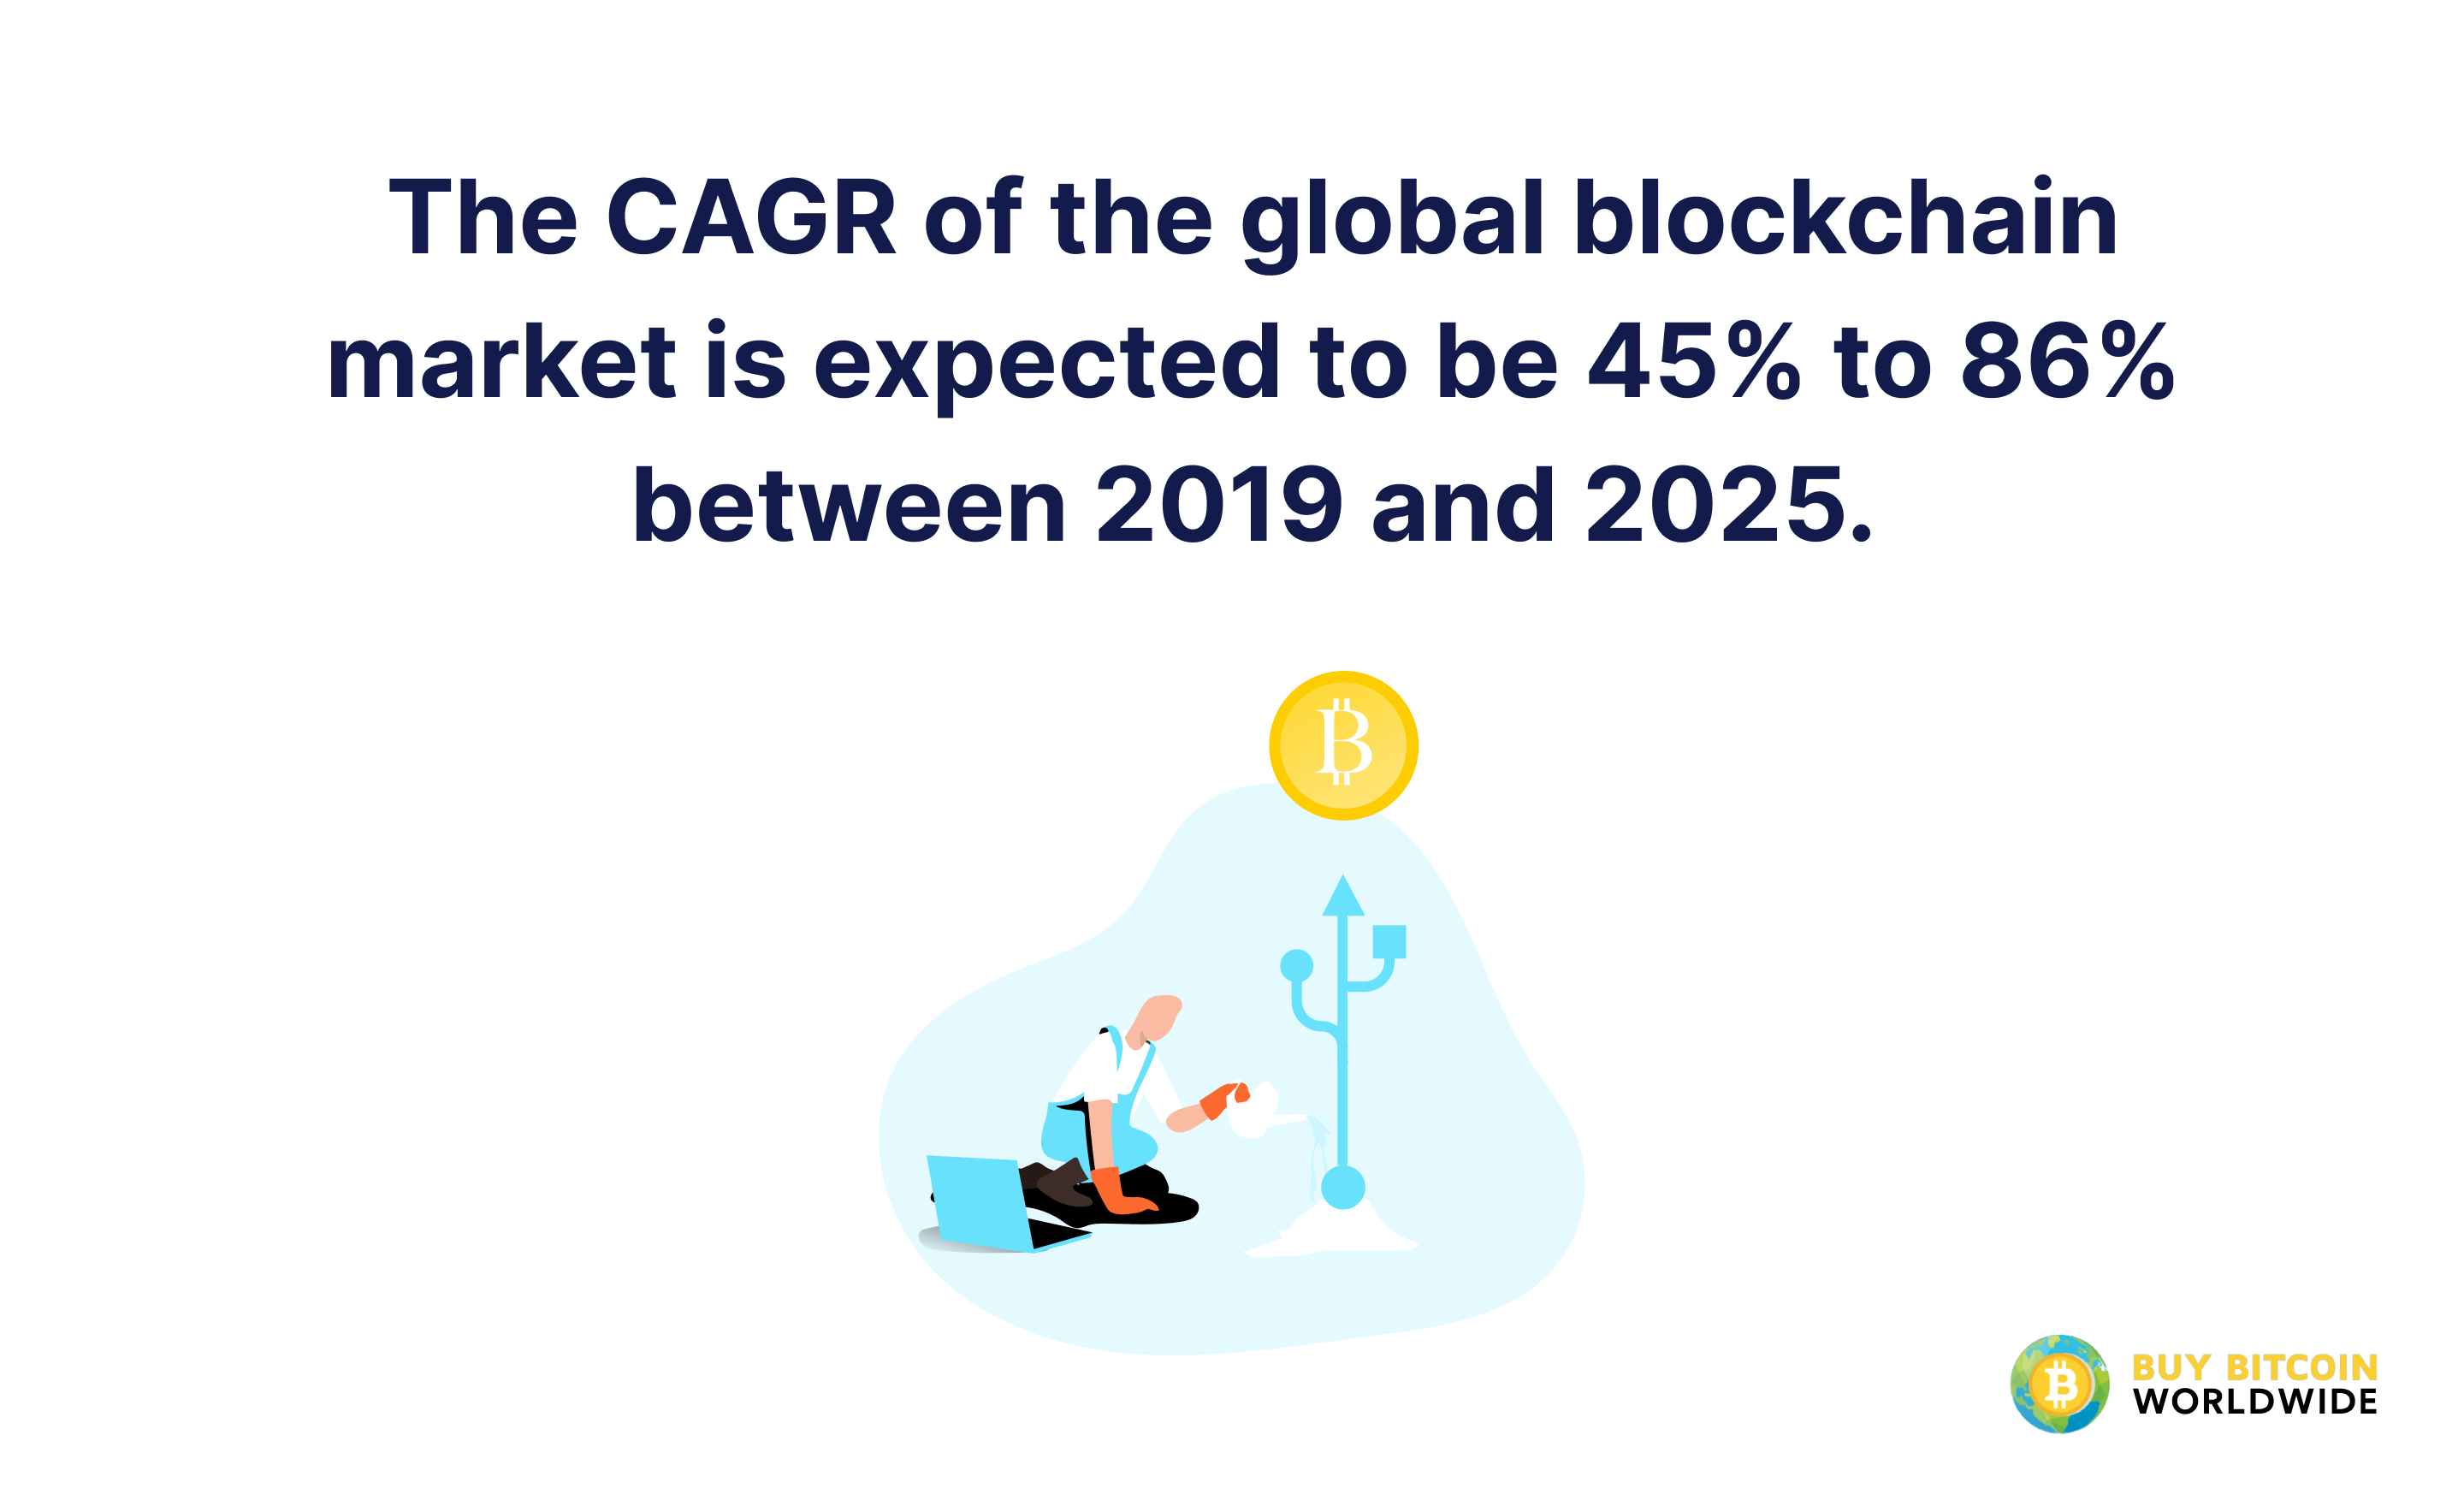 global blockchain market/industry growth rate